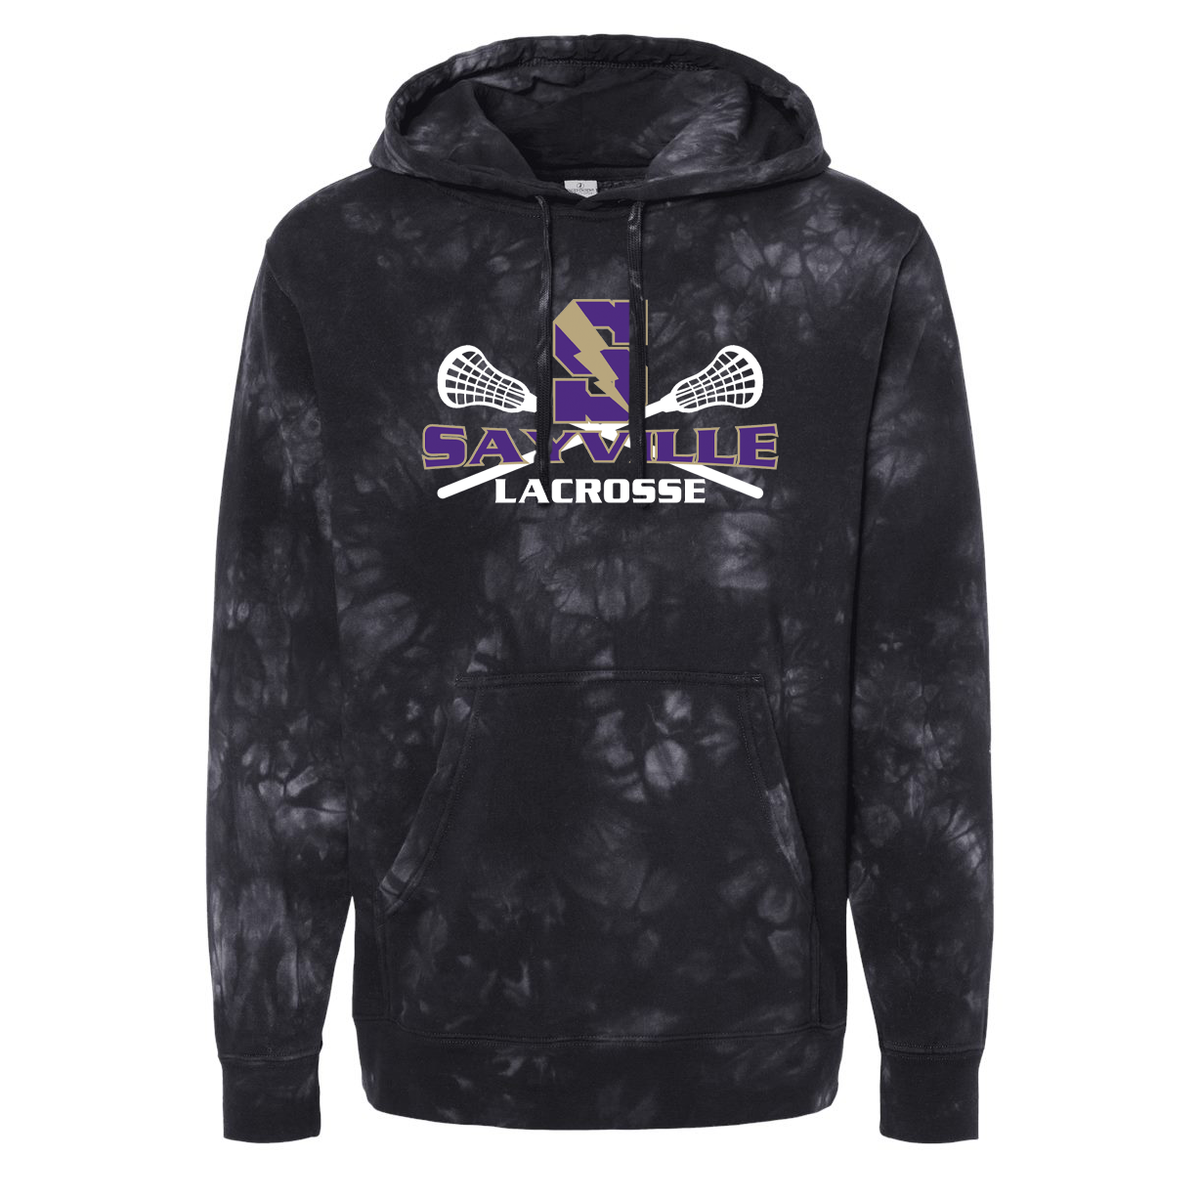 Sayville Lacrosse Independent Trading Co. Pigment-Dyed Hooded Sweatshirt